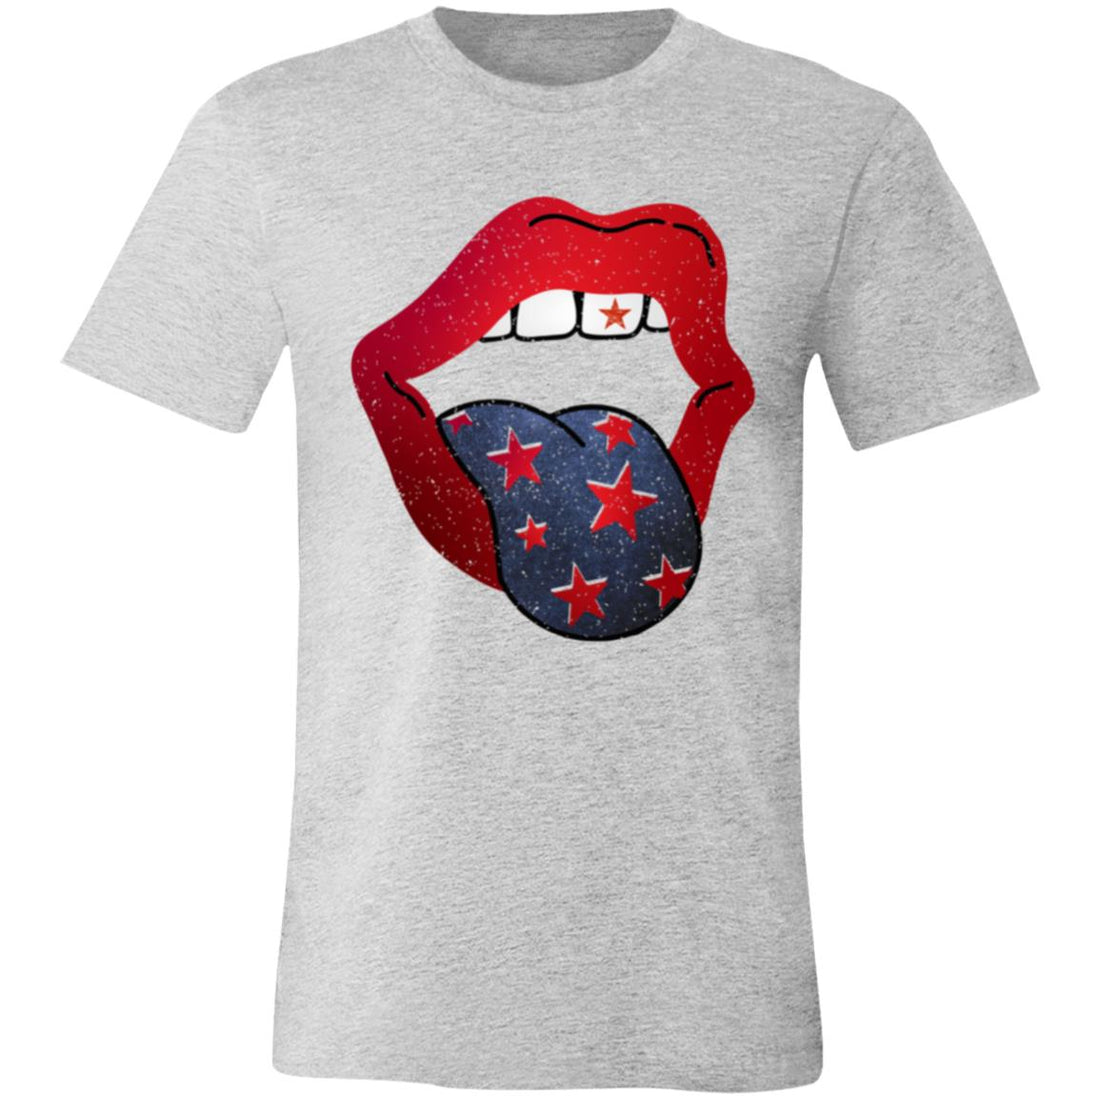 American Lips T-Shirt - T-Shirts - Positively Sassy - American Lips T-Shirt